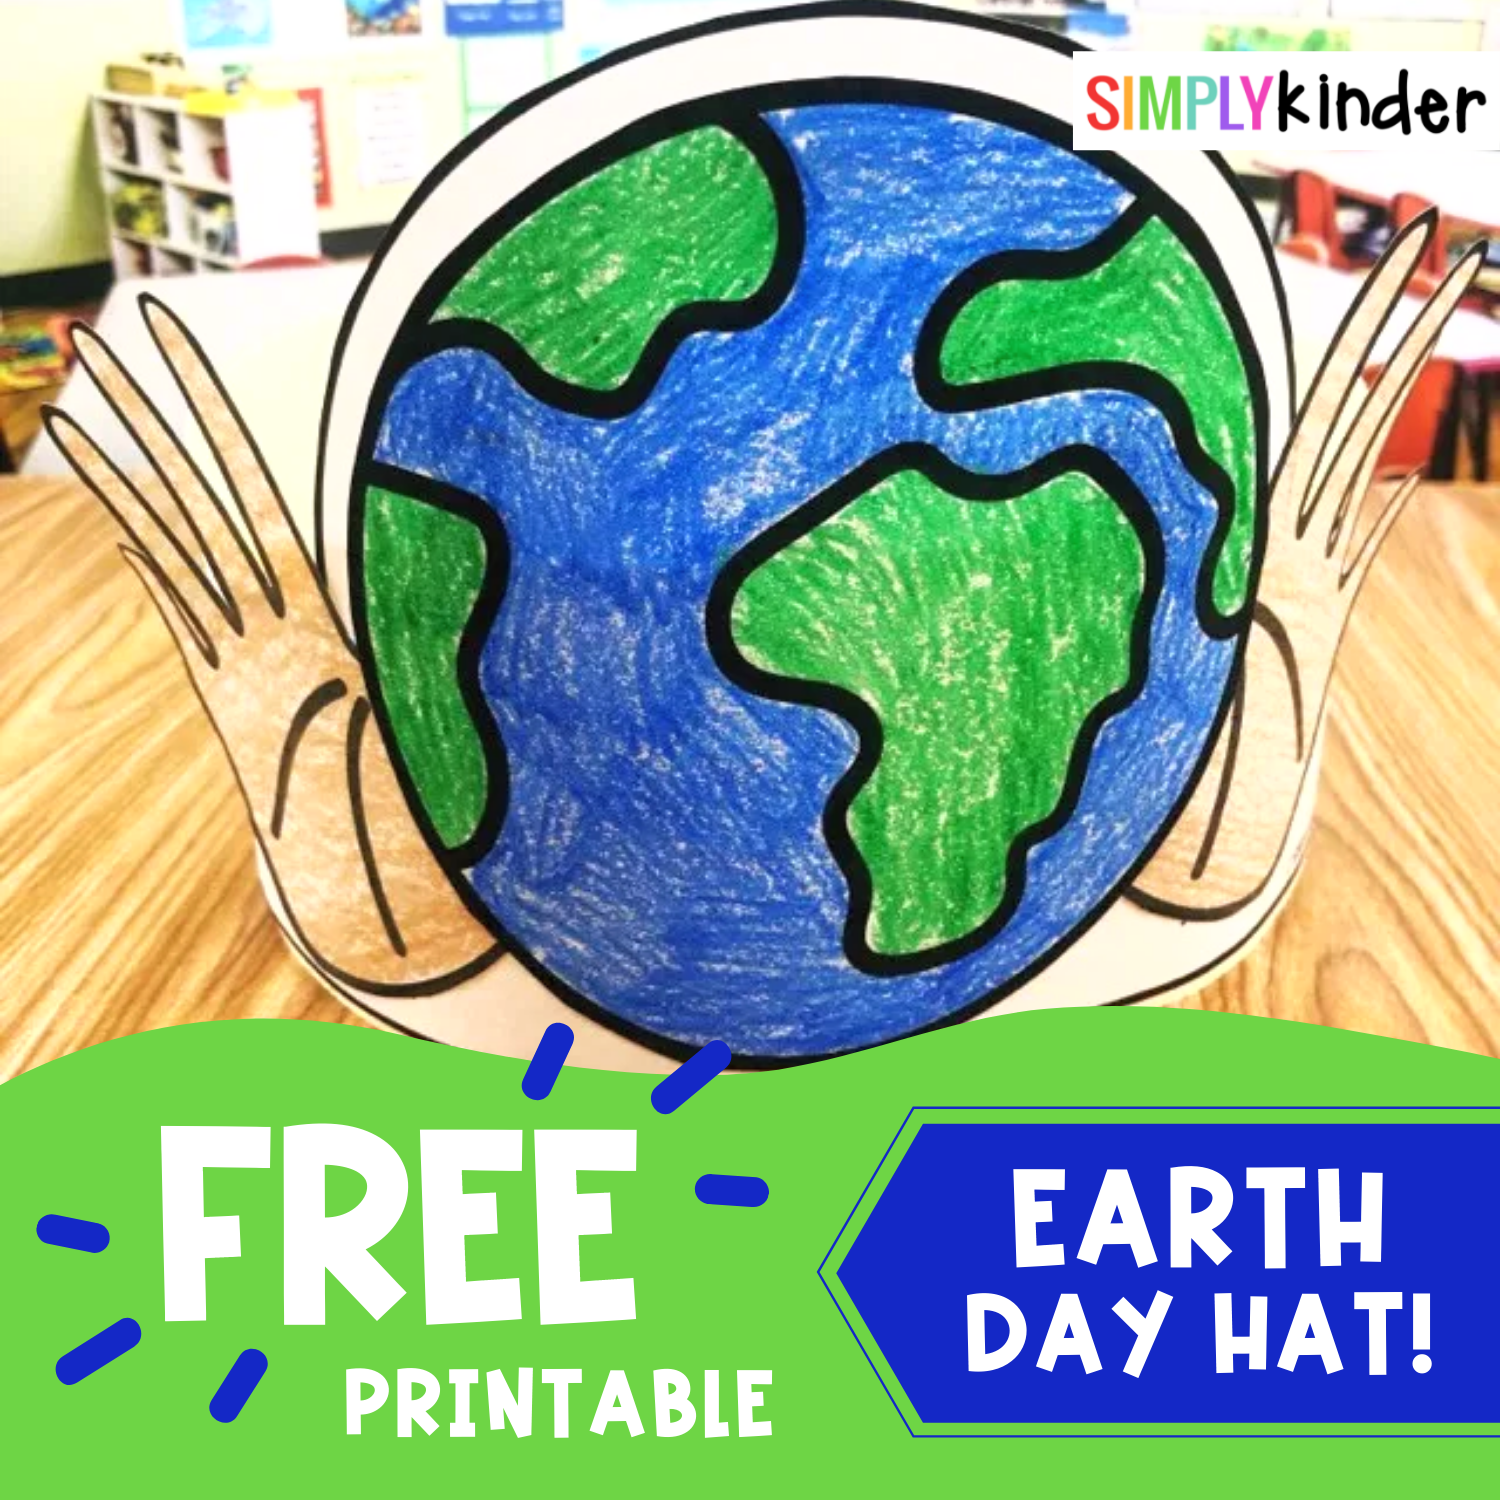 Free Earth Day Hat Simply Kinder